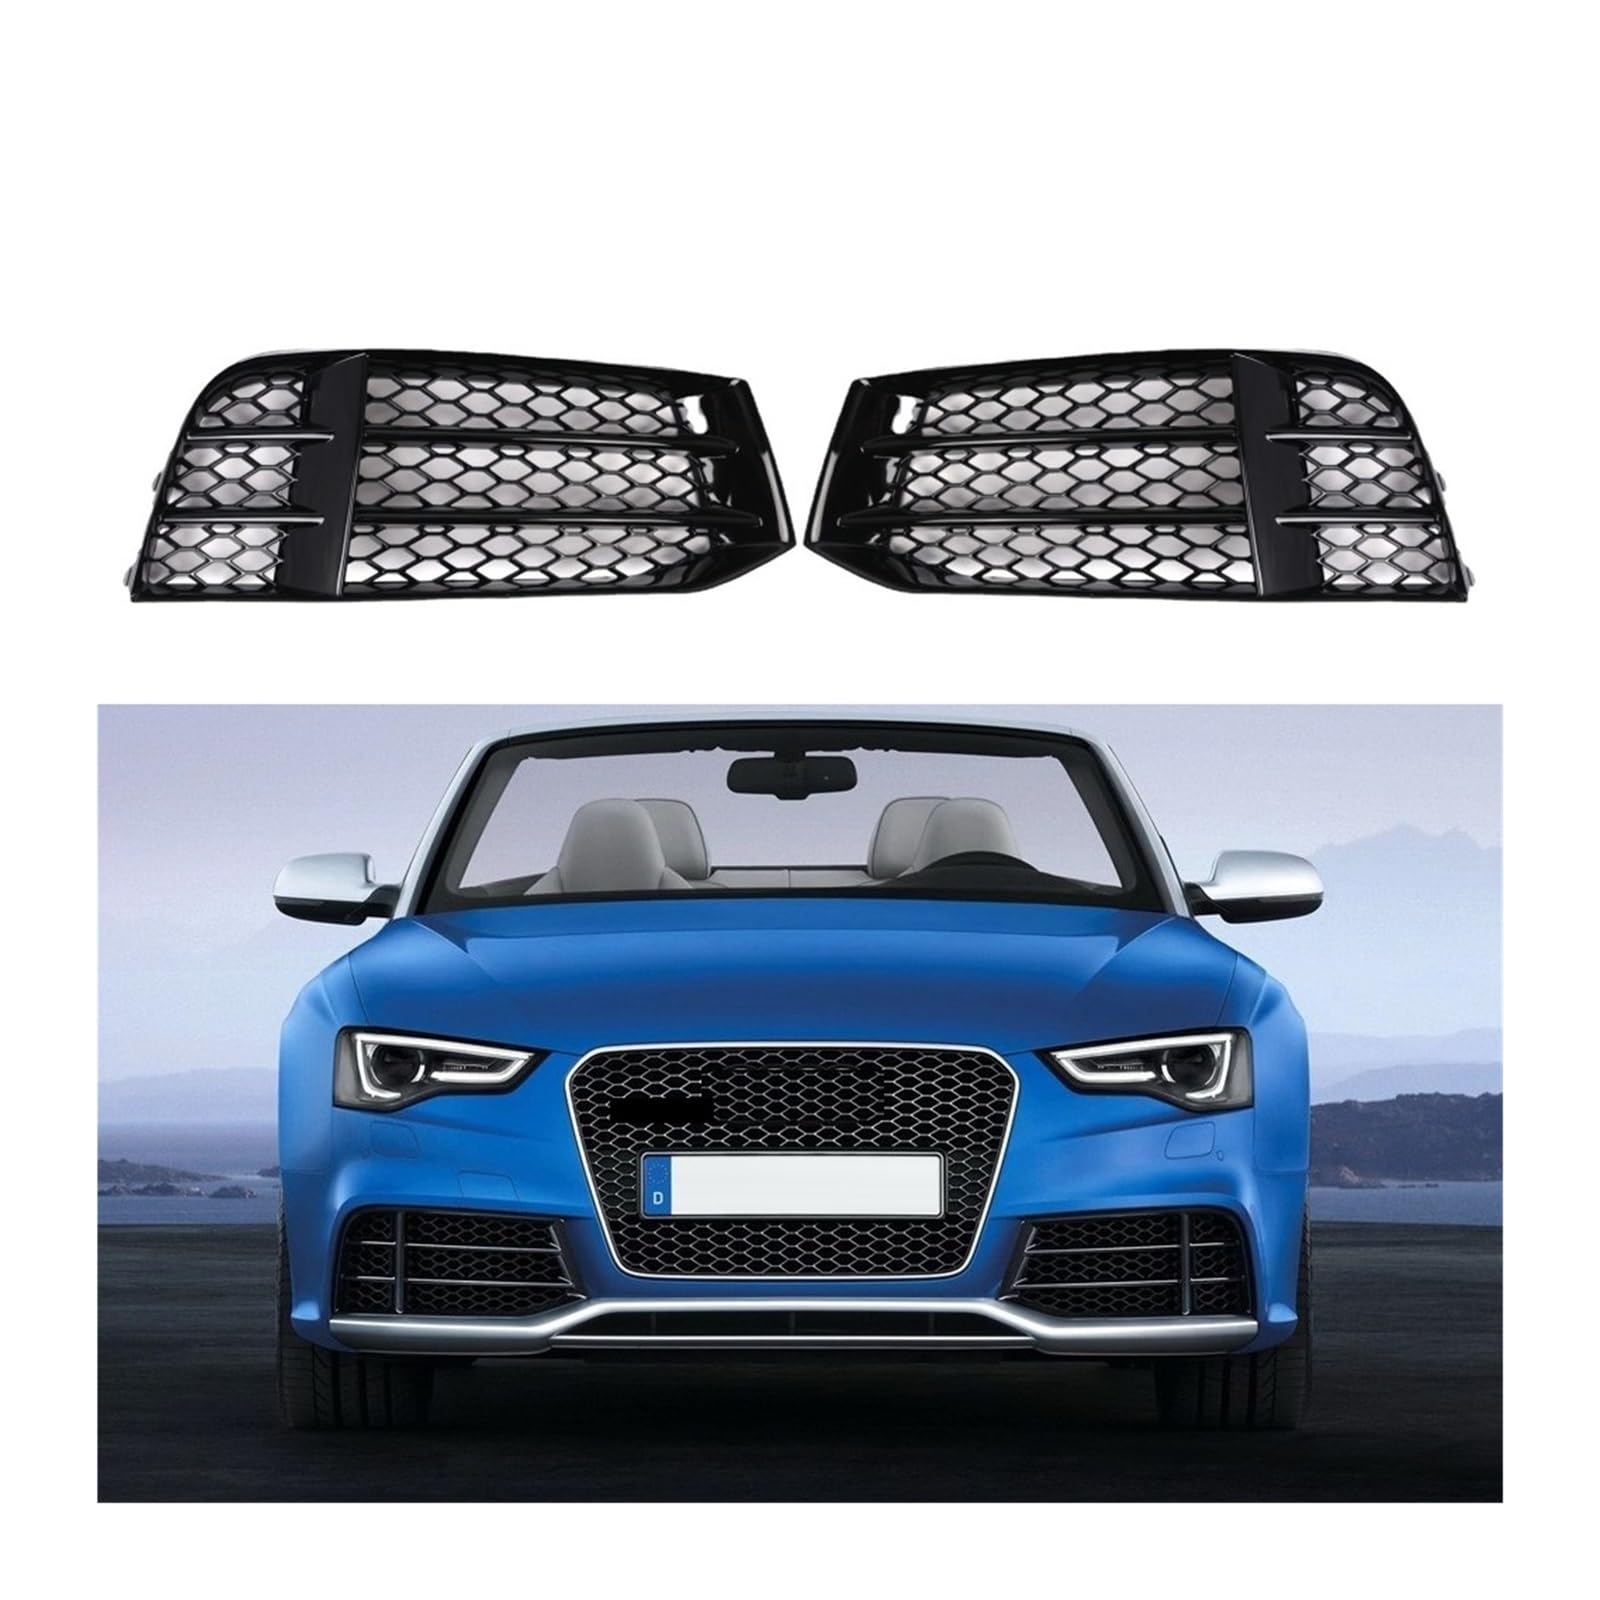 Retrofit RS5 Racing Grills Honeycomb Front Fog Light Guard Fog Lamp Cover Grill Car Accessories Compatible For Audi A5 S5 2007-2015(Right) von BRANISLVV